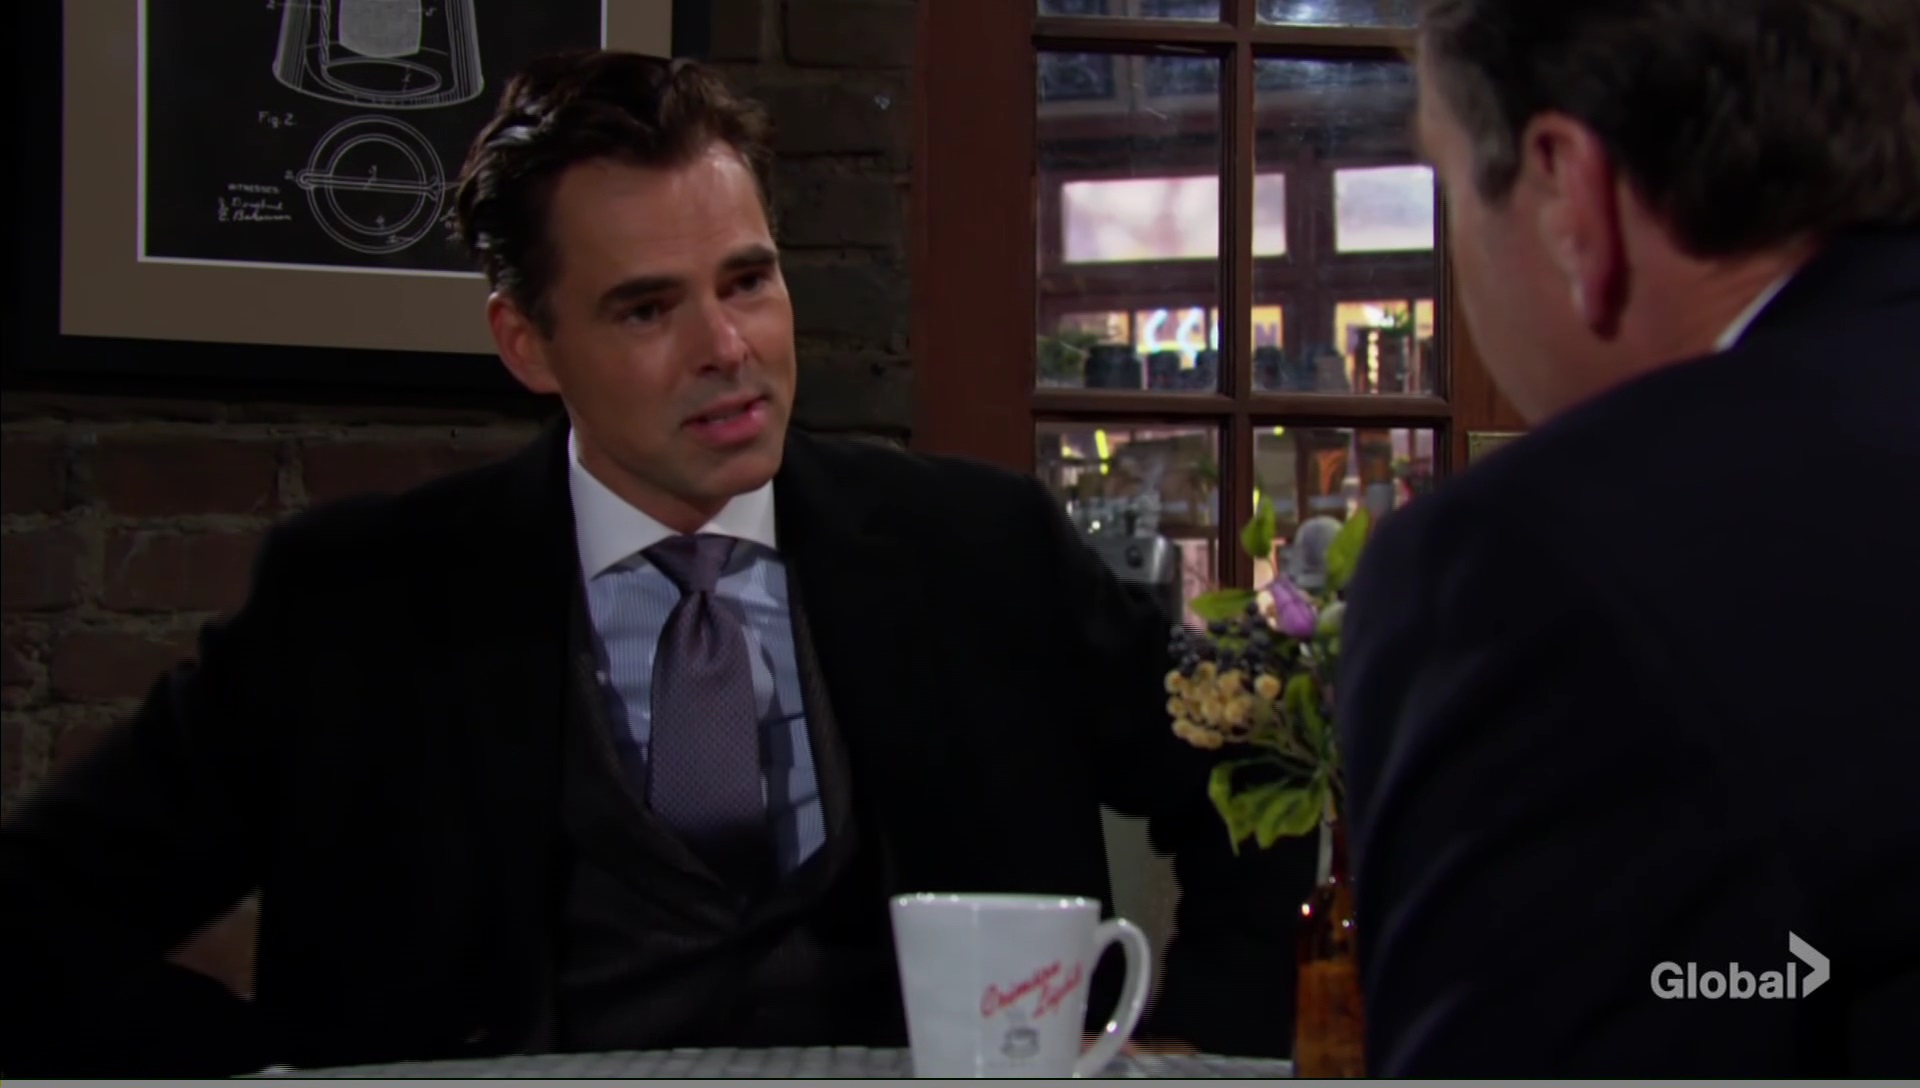 billy asks about phyllis young and restless